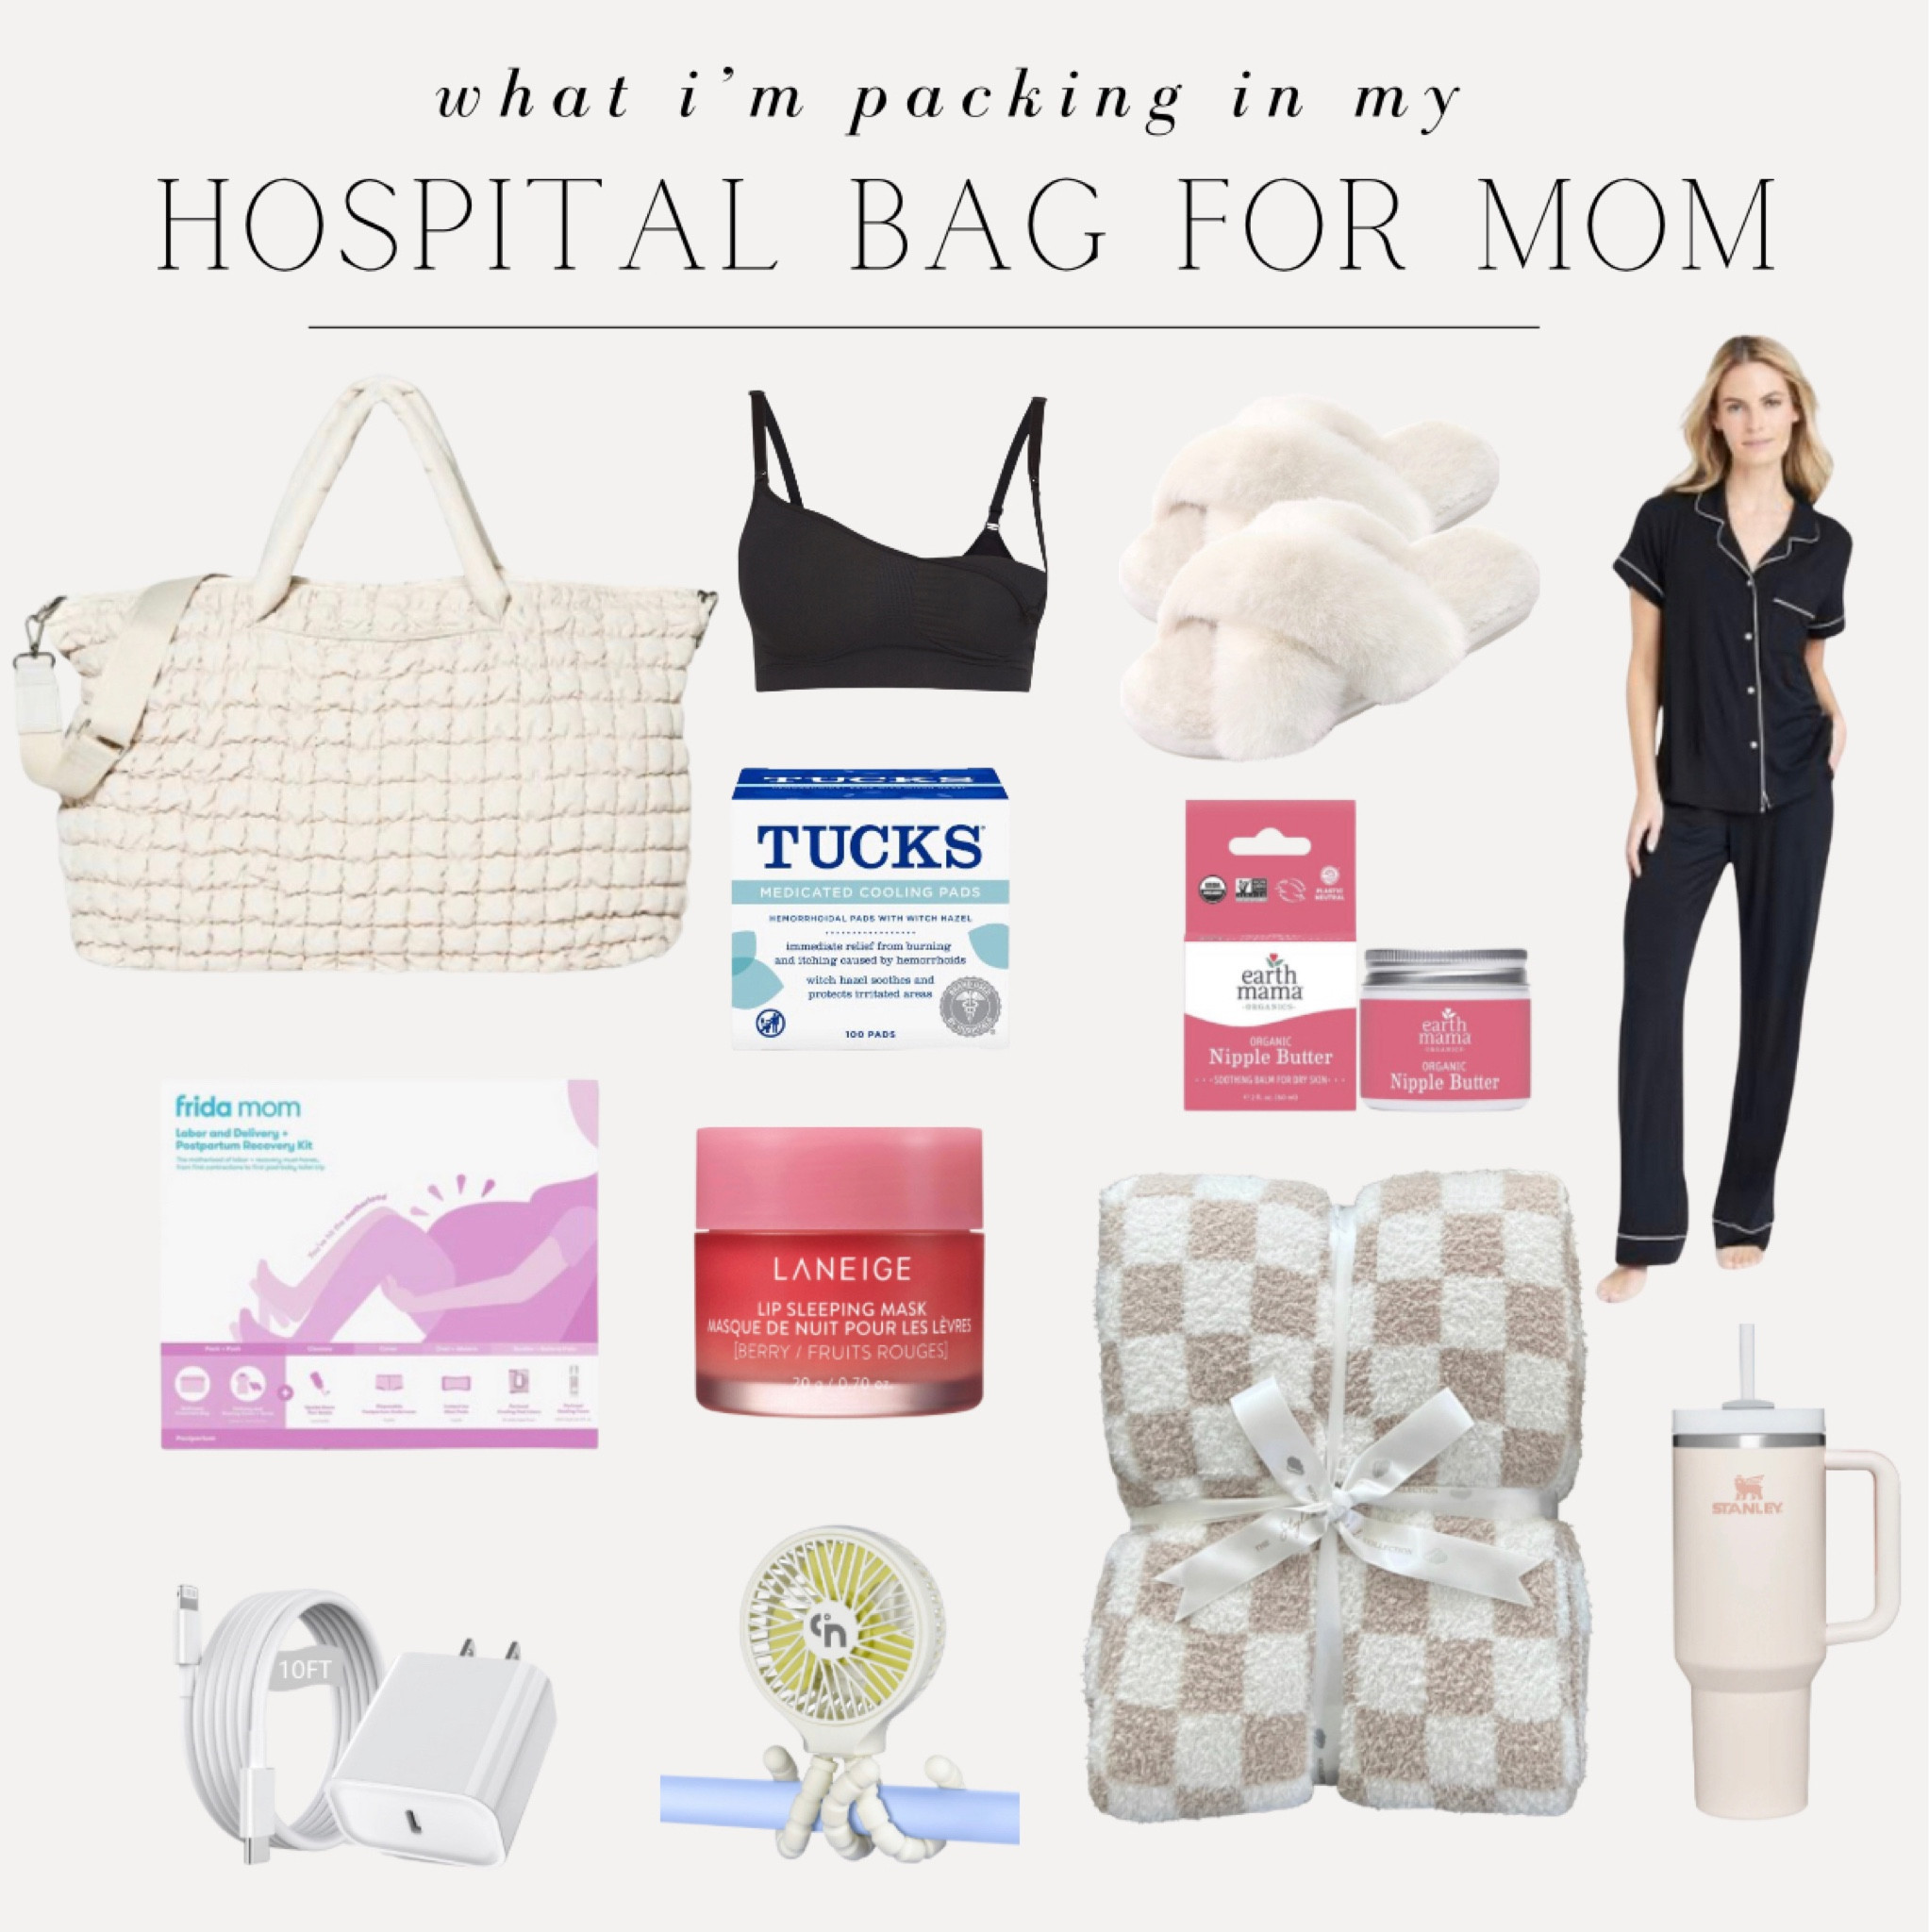 FridaMom Labor and Delivery + Postpartum Recovery Kit